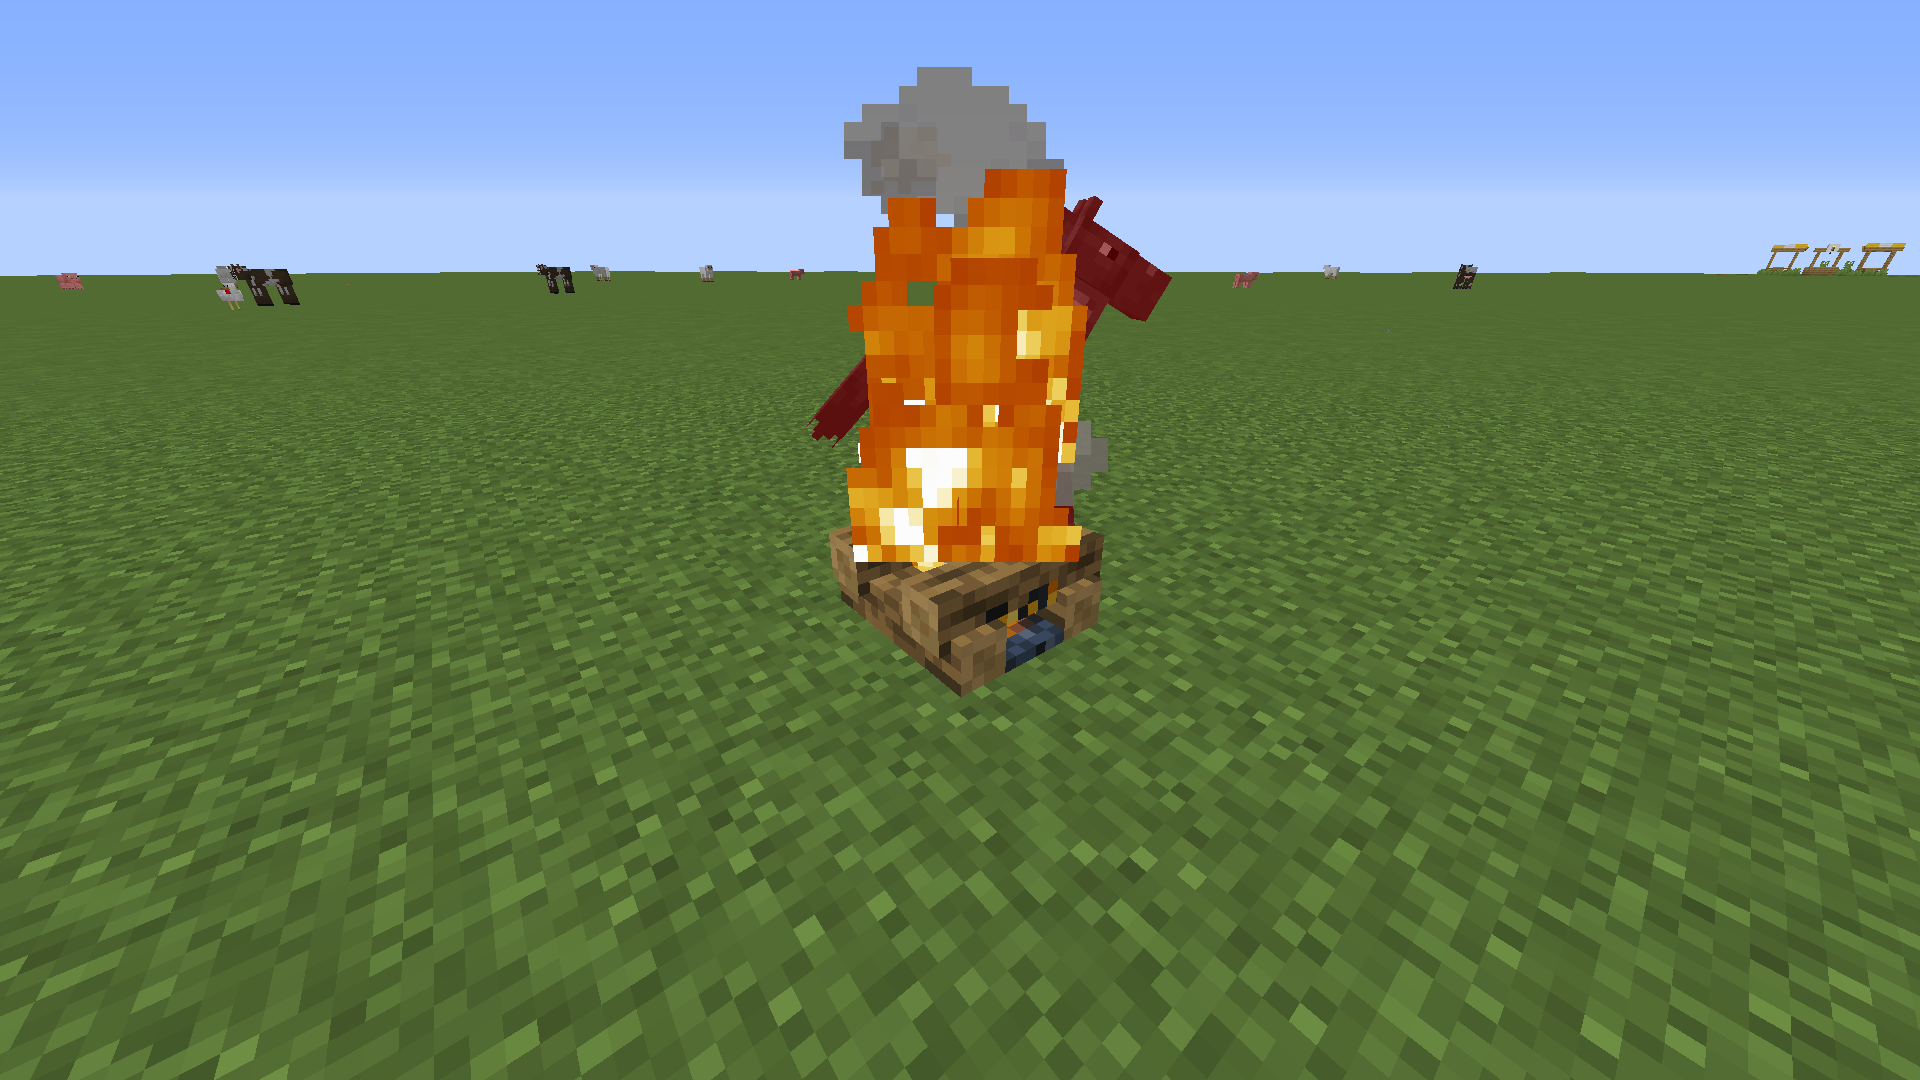 Campfire now burns mobs & damage players